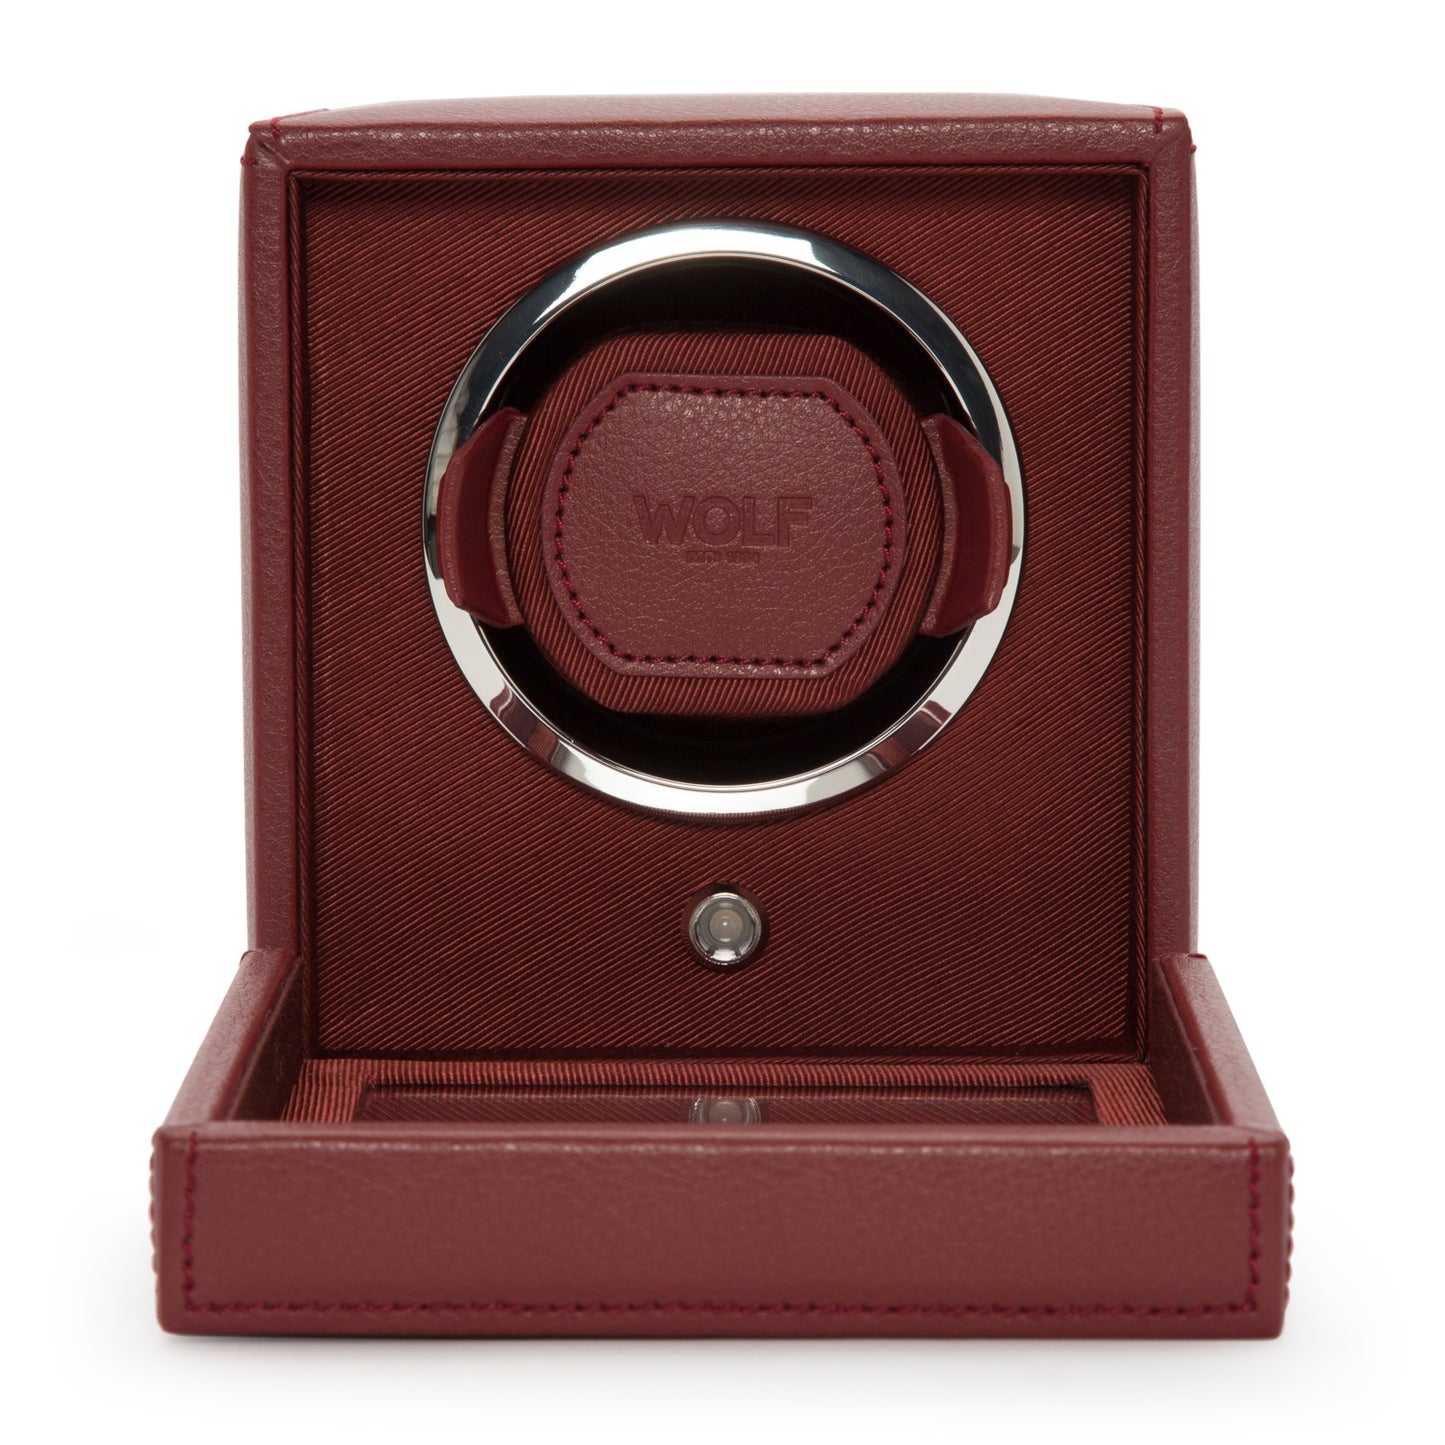 Cub Single Watch Winder with Cover, Bordeaux